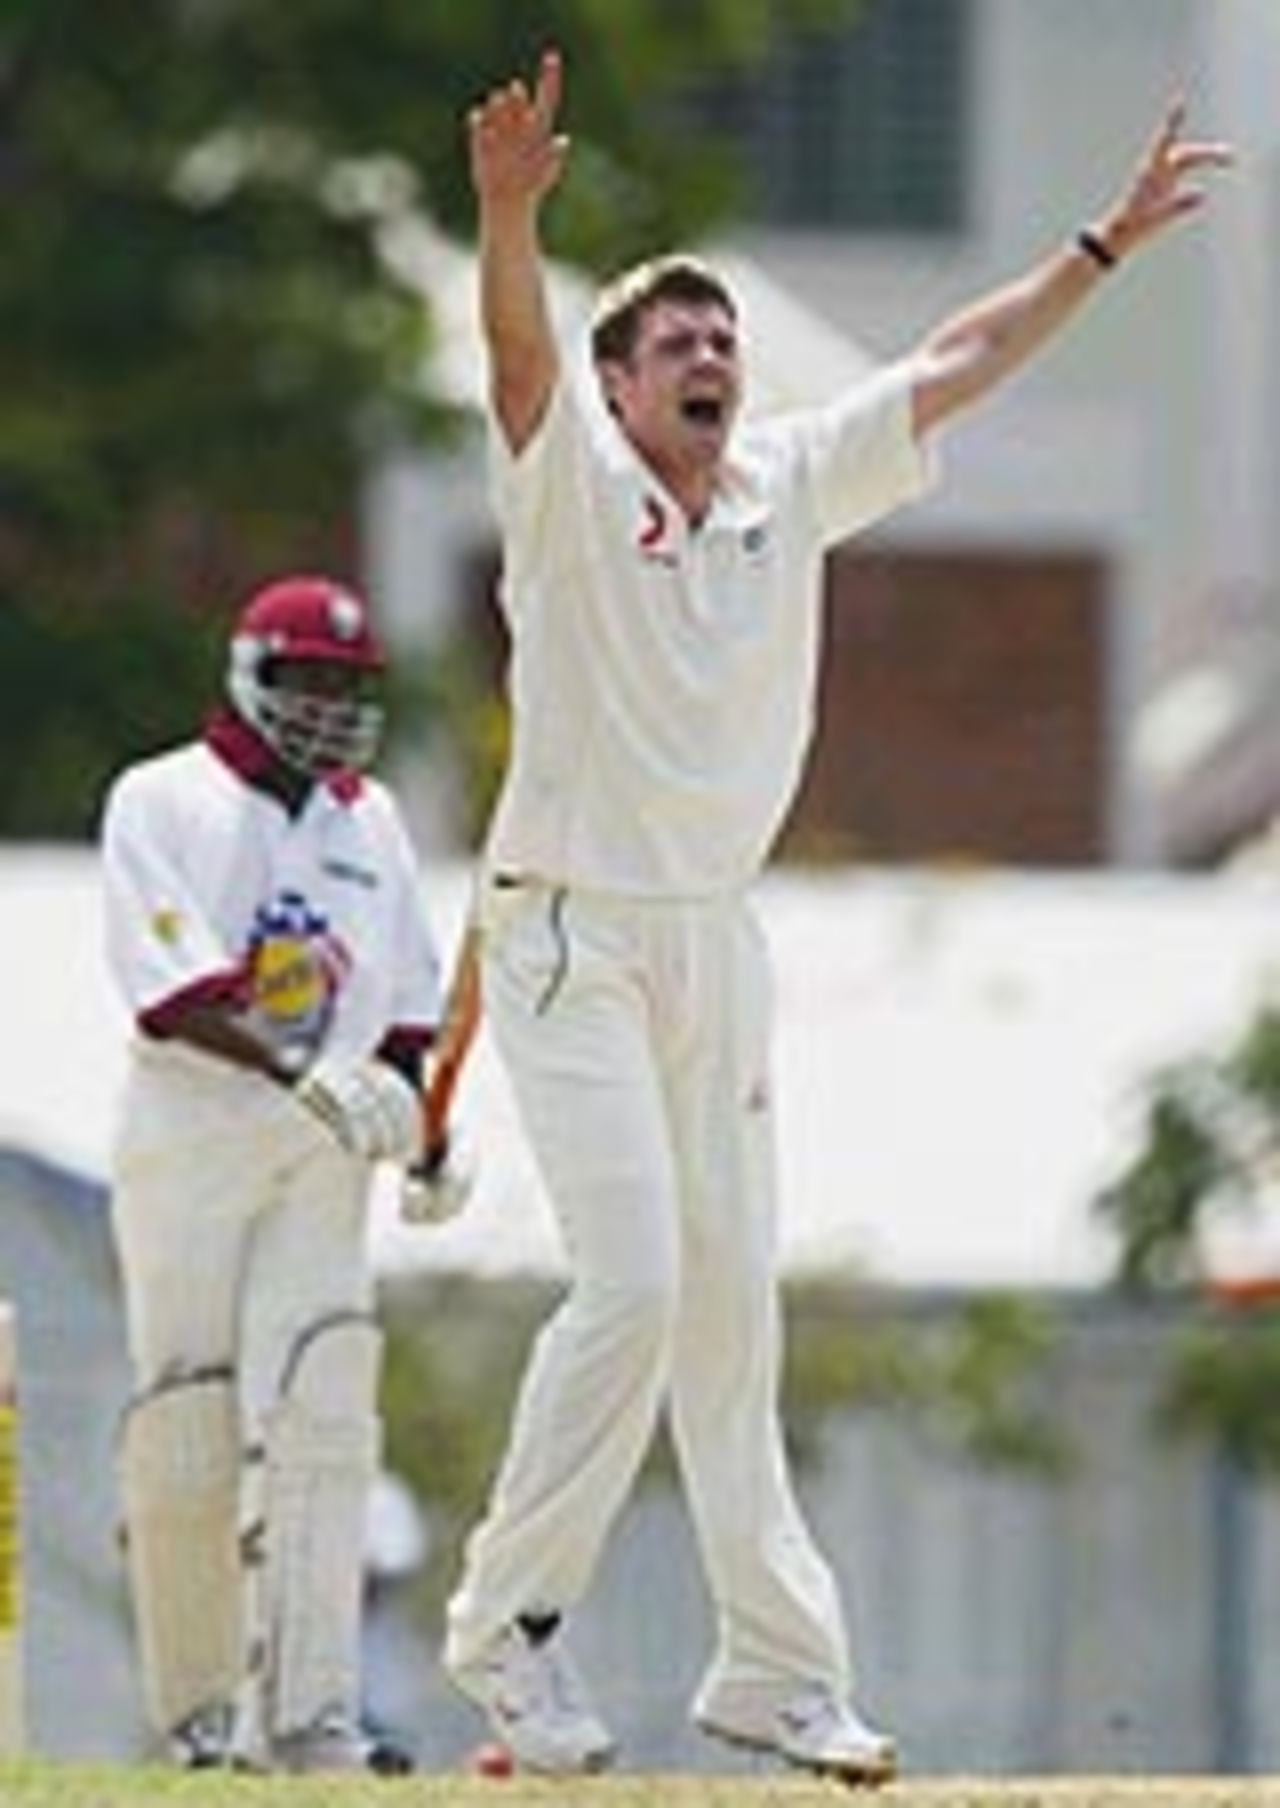 James Anderson appeals for a wicket, England v Carib Beer XI, Barbados, March 26, 2004